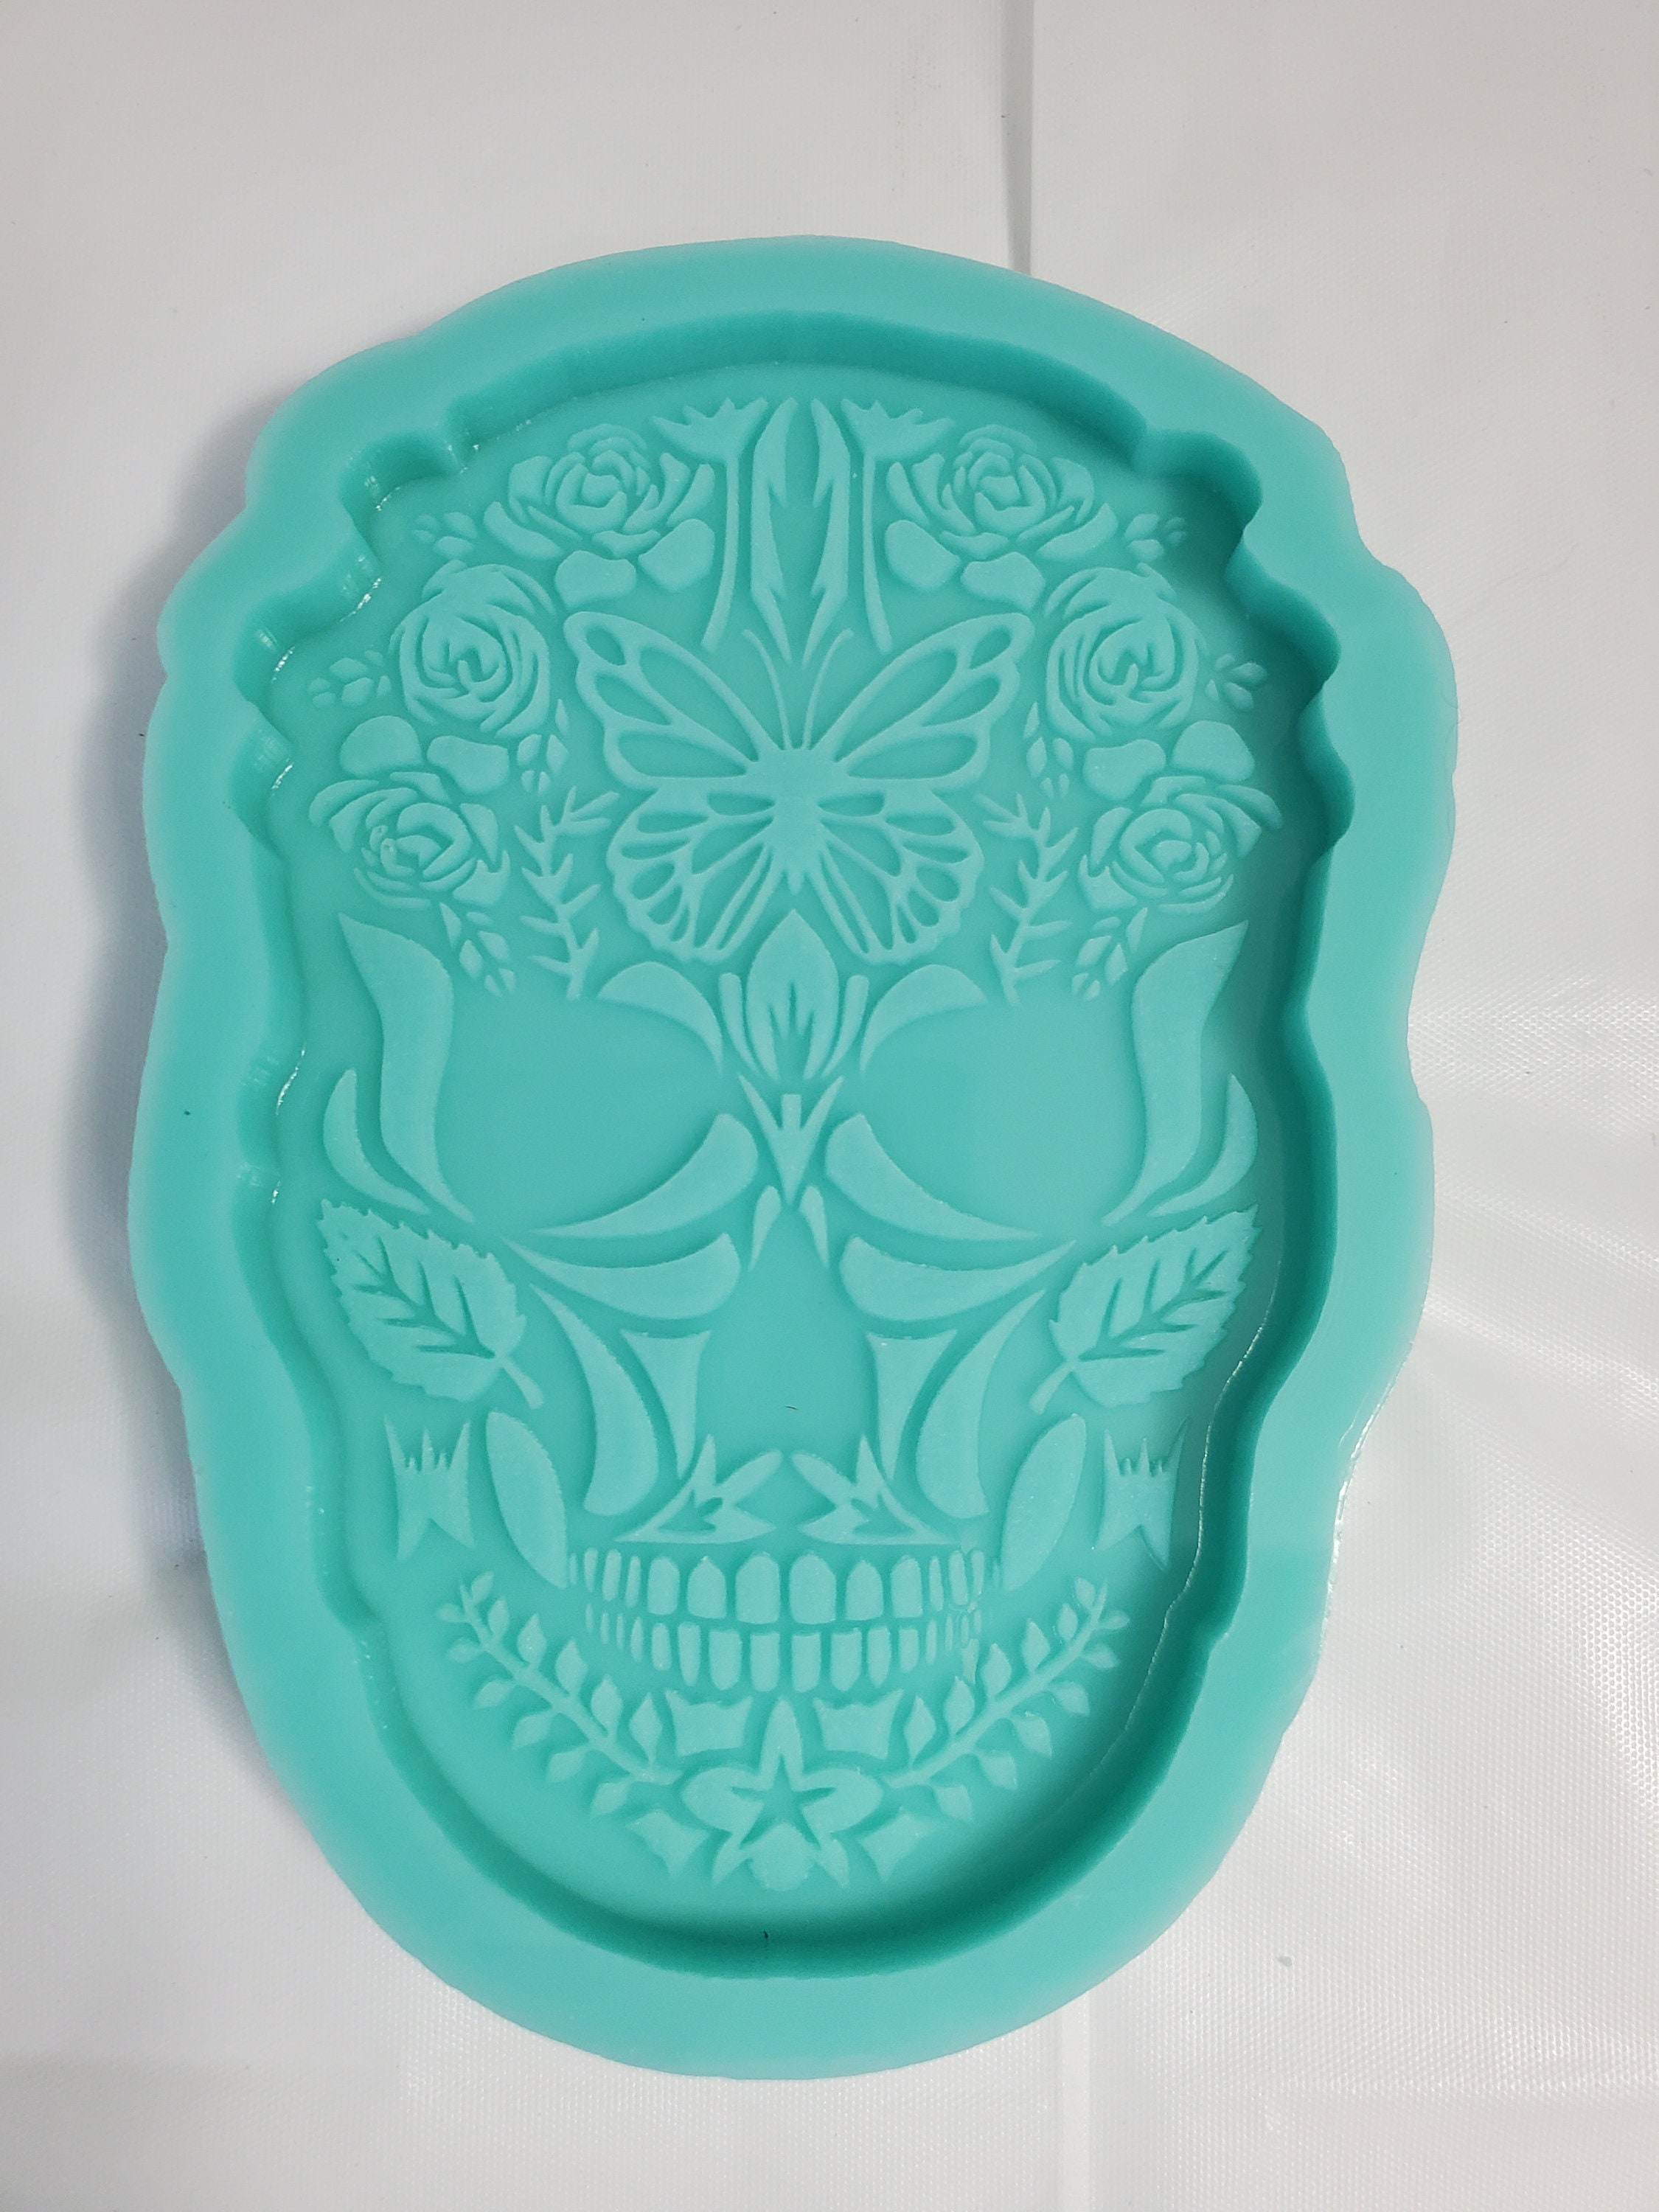 Gadgets - Snake into the human skull mold - Hand of the skeleton 3D molds  Hand Silicone Mold Craft Halloween Zombie Mold - Snake skull mould